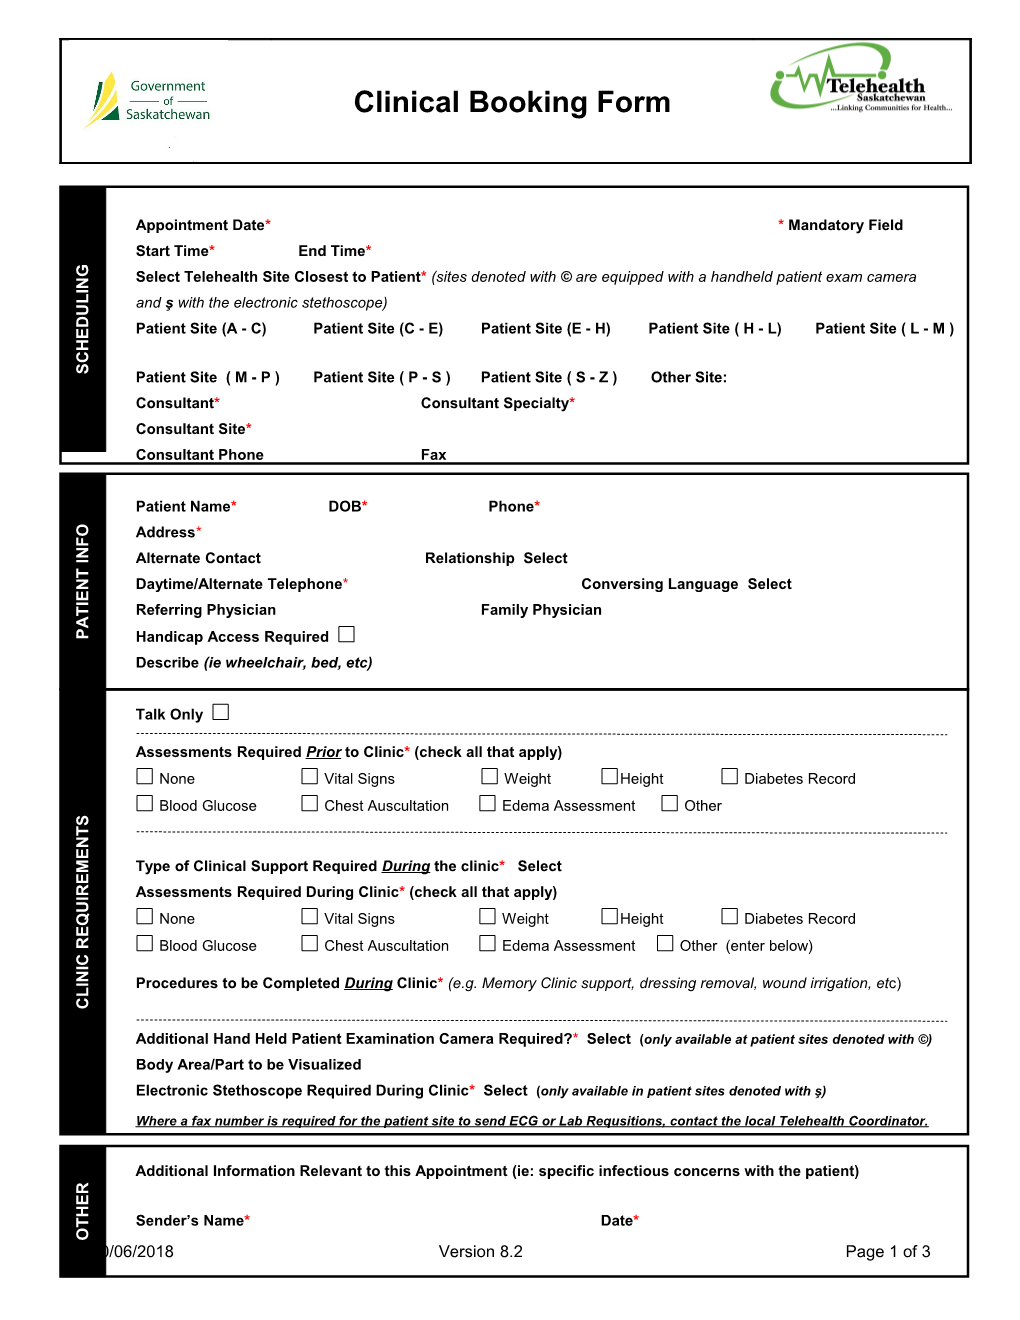 Clinical Booking Form